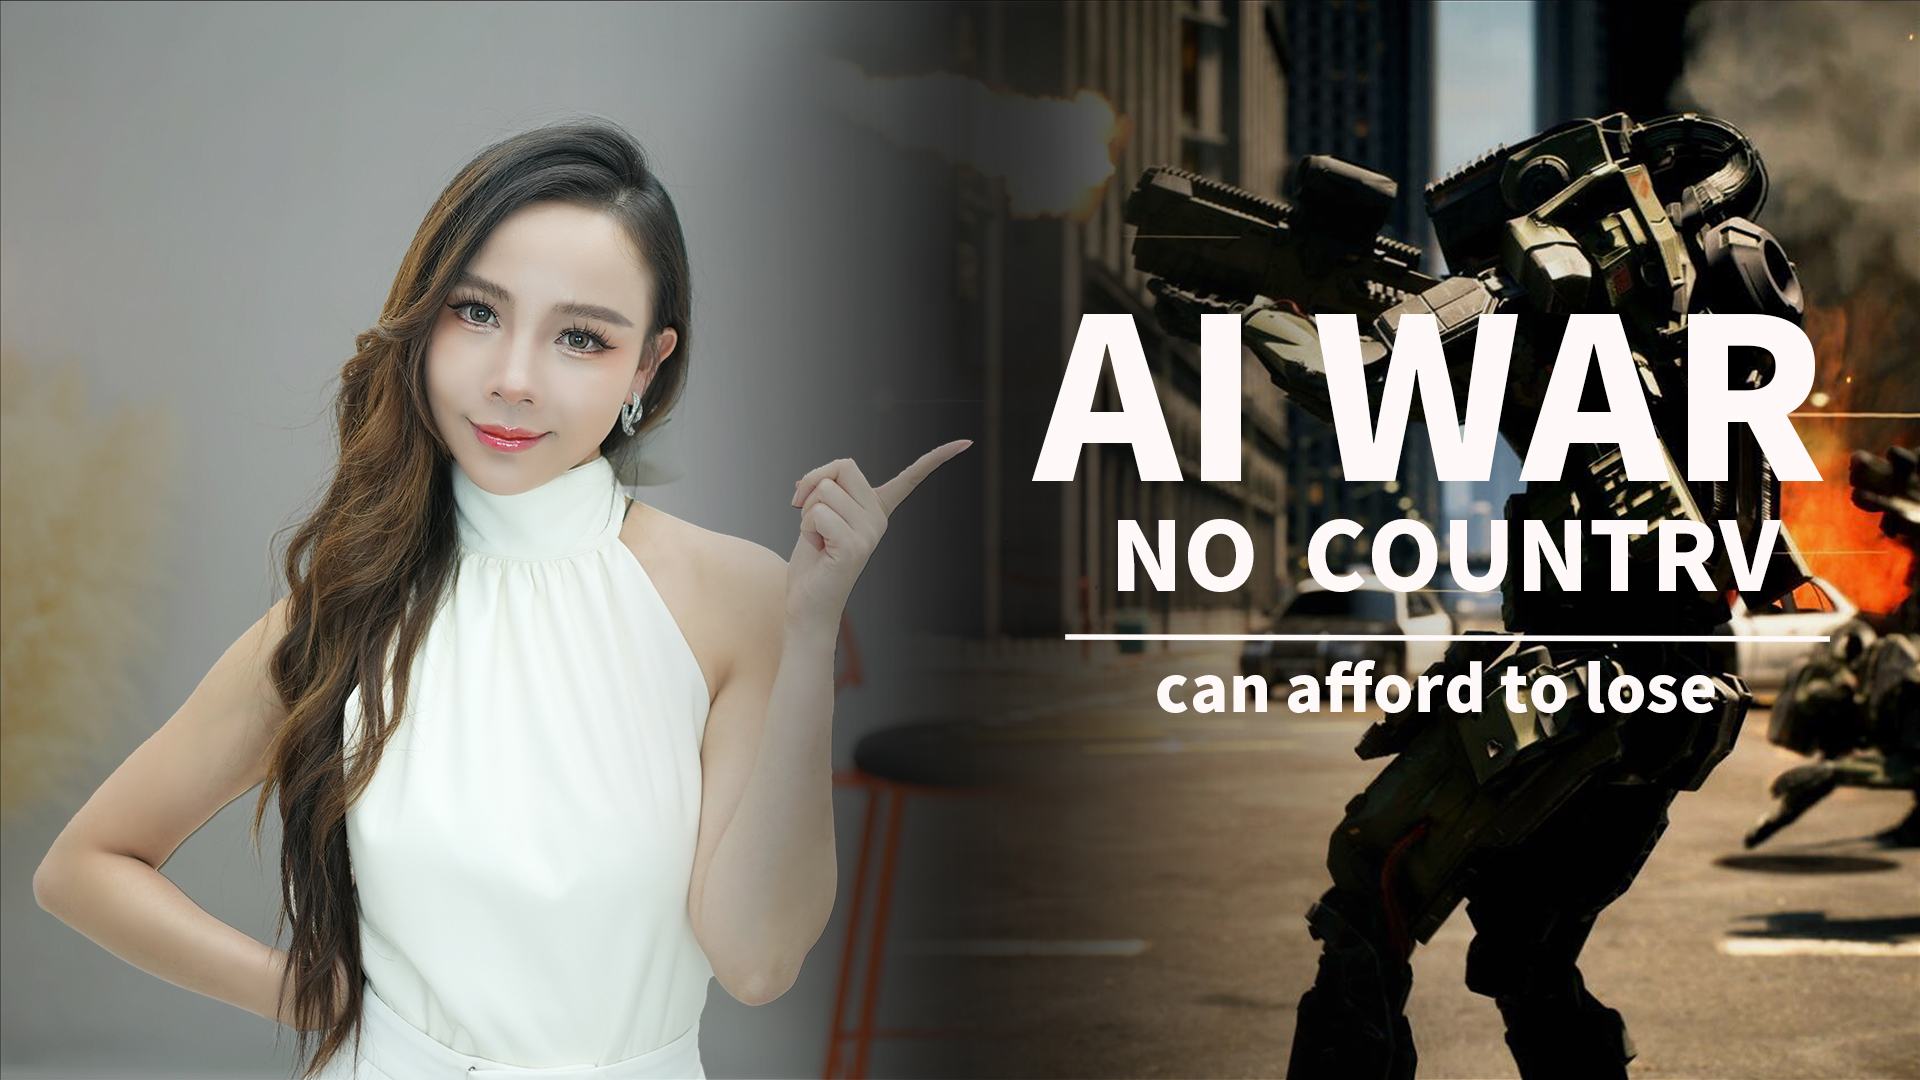 AI War:AI is a battle that no country can afford to lose